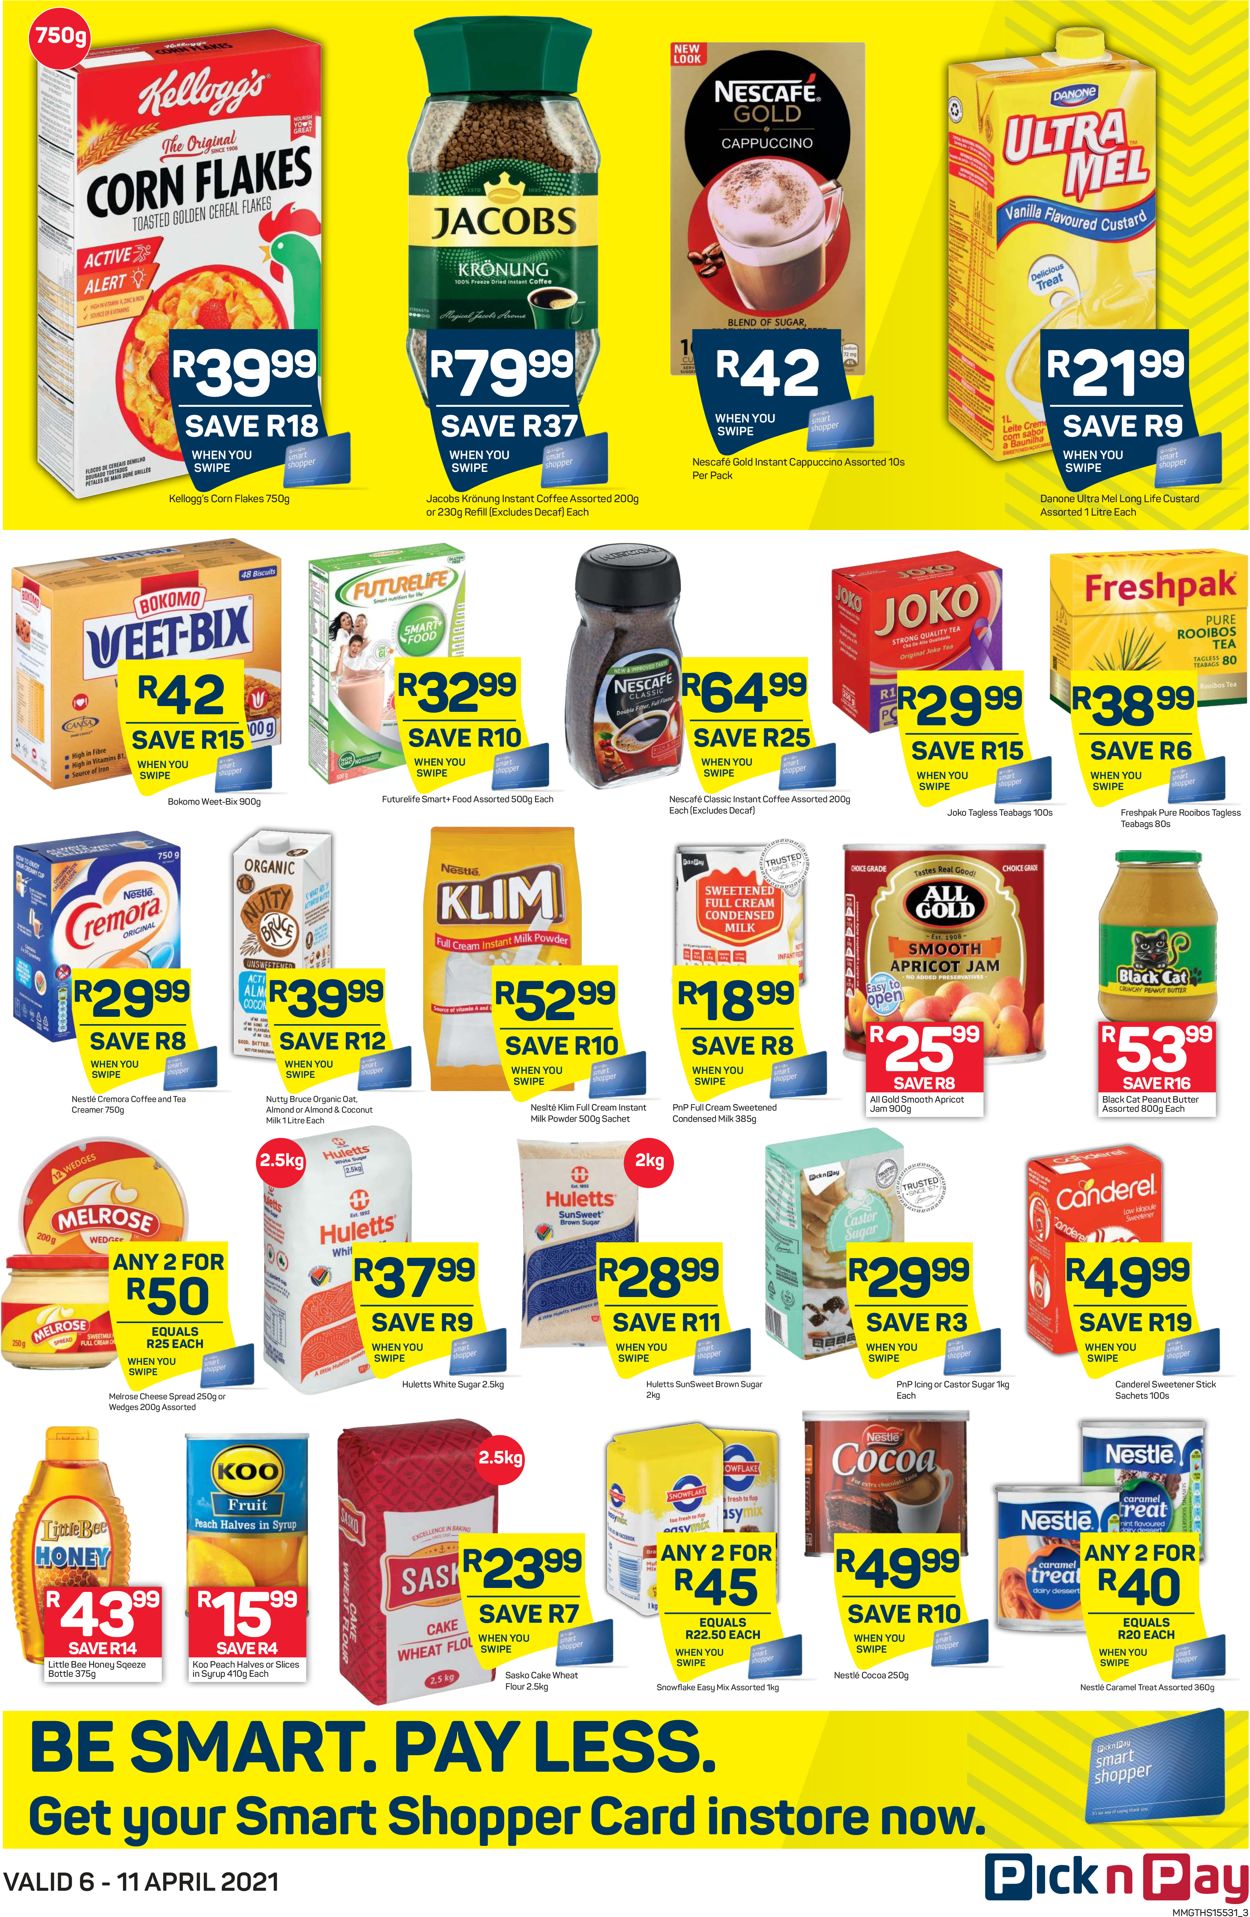 Pick n Pay Catalogue - 2021/04/06-2021/04/11 (Page 3)